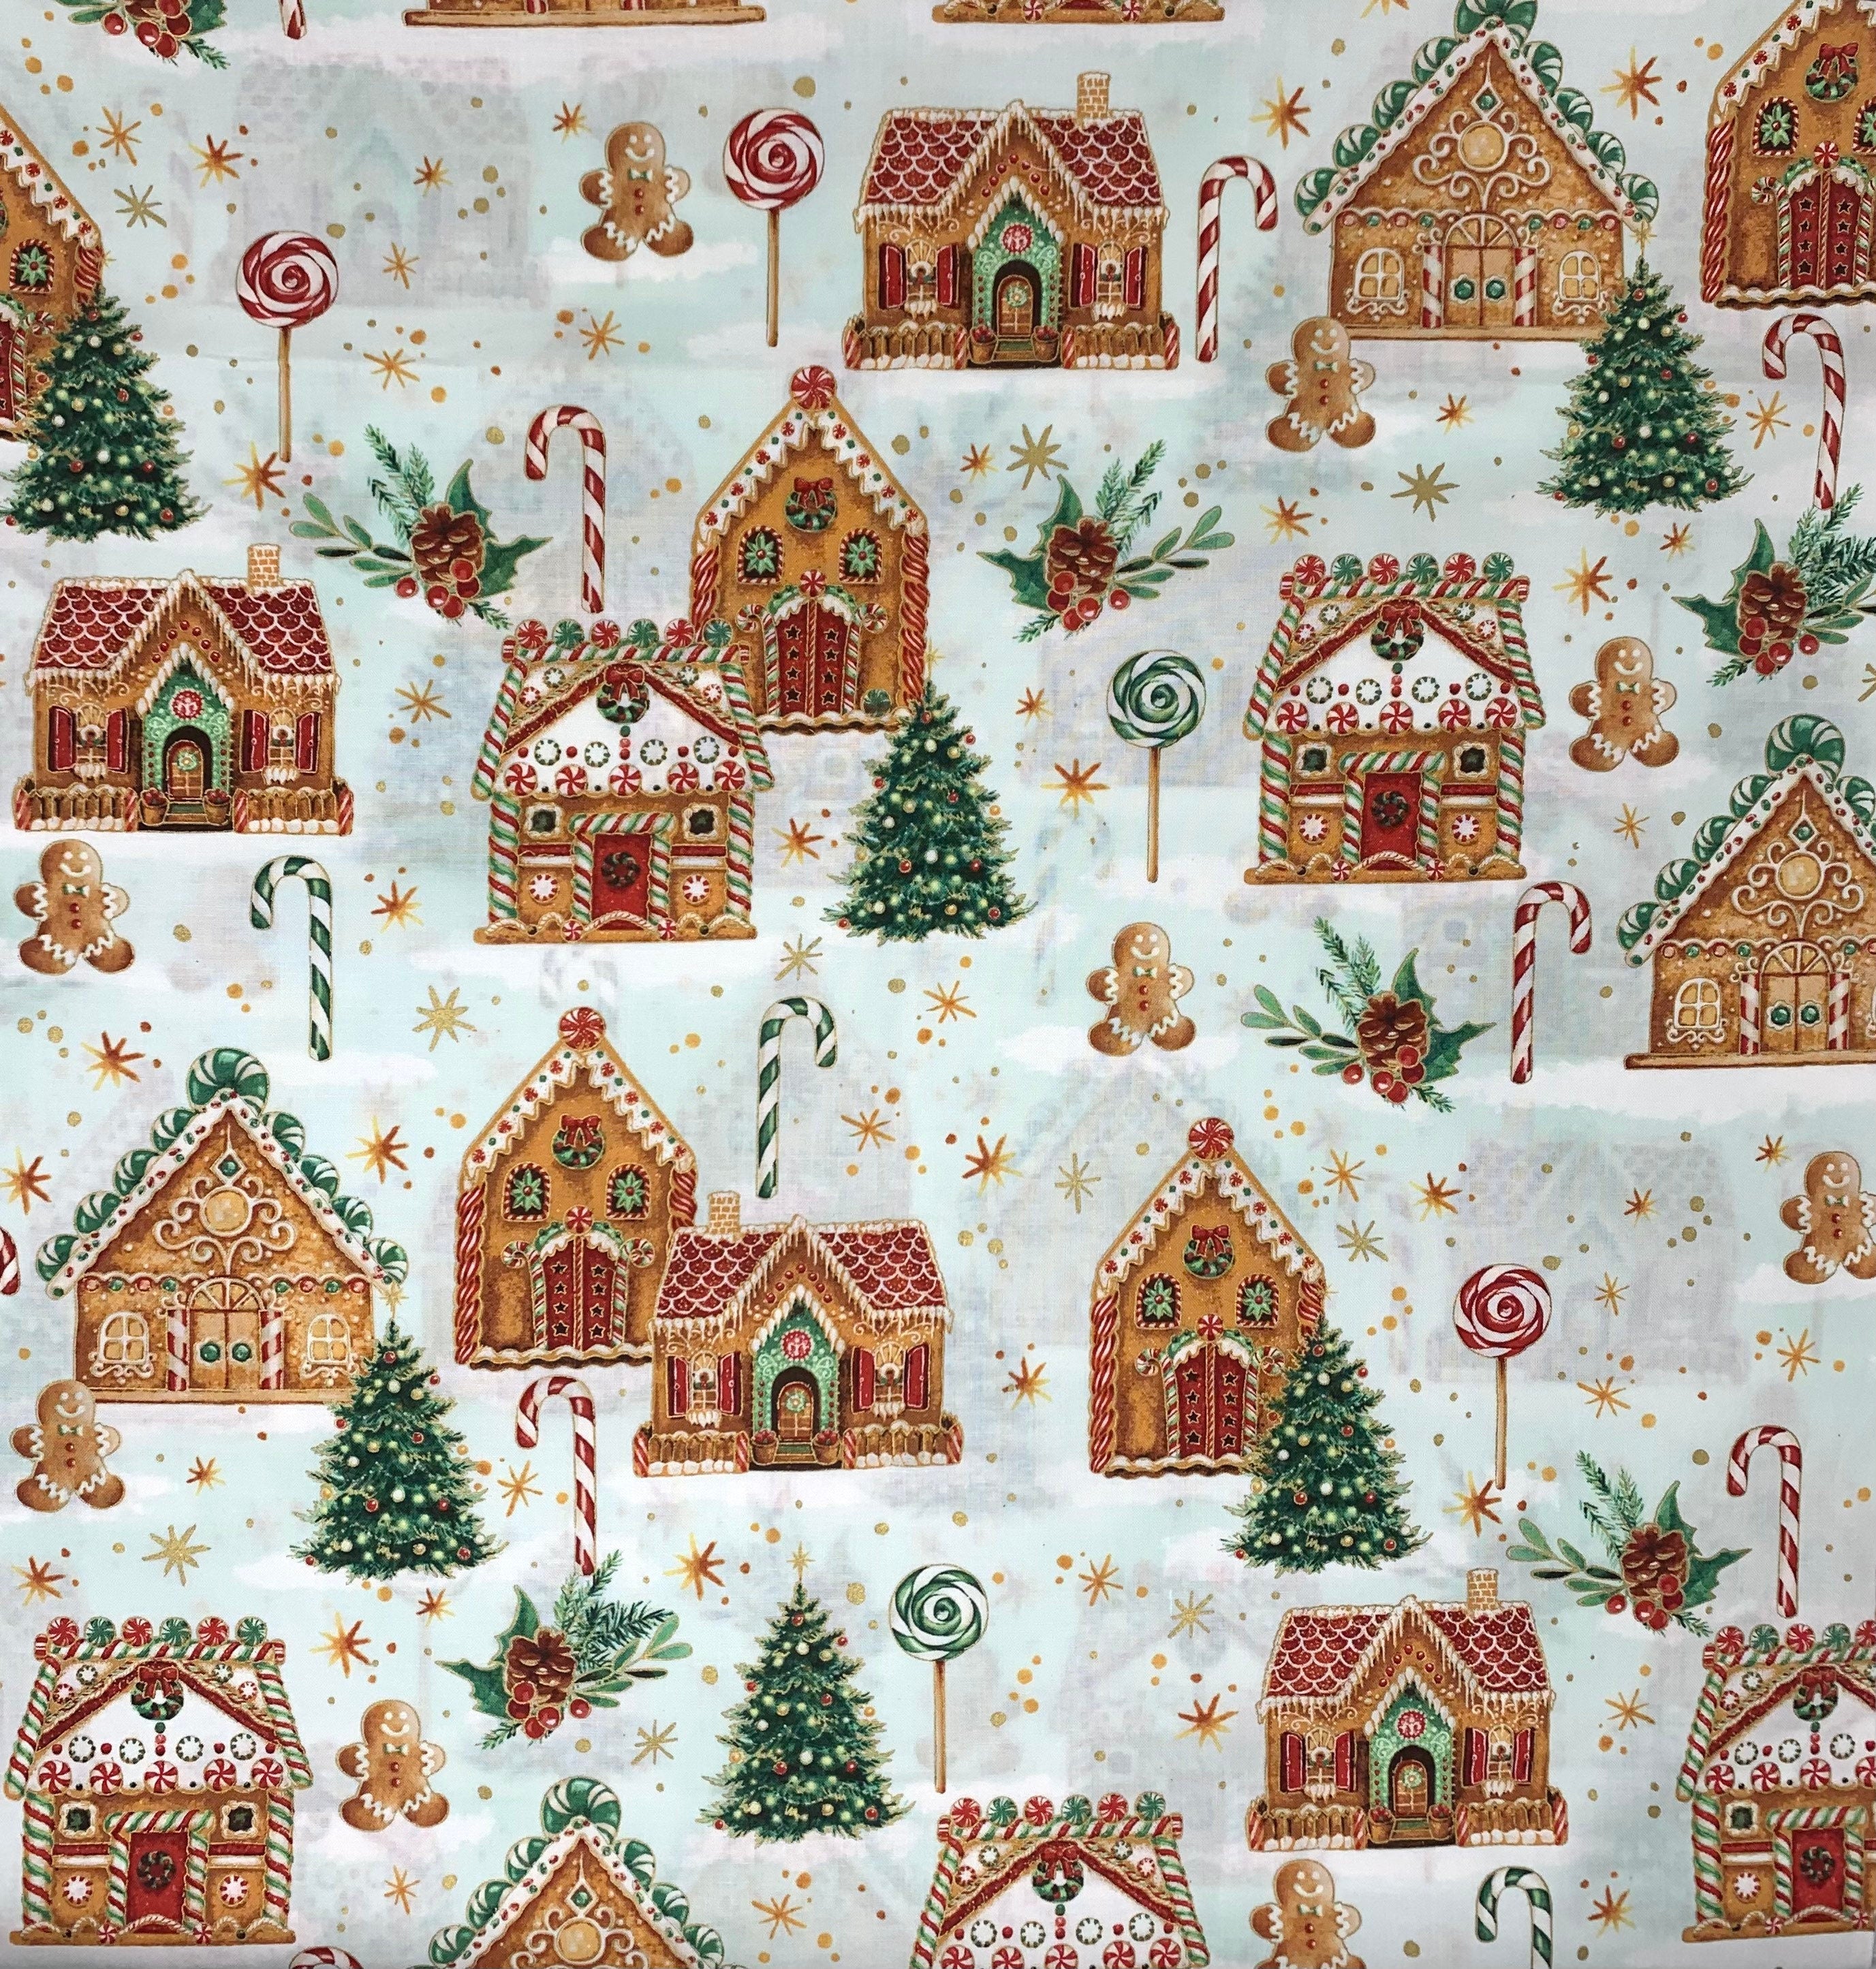  Christmas Fabric by The Yard, Gingerbread Upholstery Fabric,  Xmas Floral Bells Candy Canes Decorative Fabric, Plant Leaves Indoor  Outdoor Fabric, DIY Art Waterproof Fabric, Green Red, 10 Yards